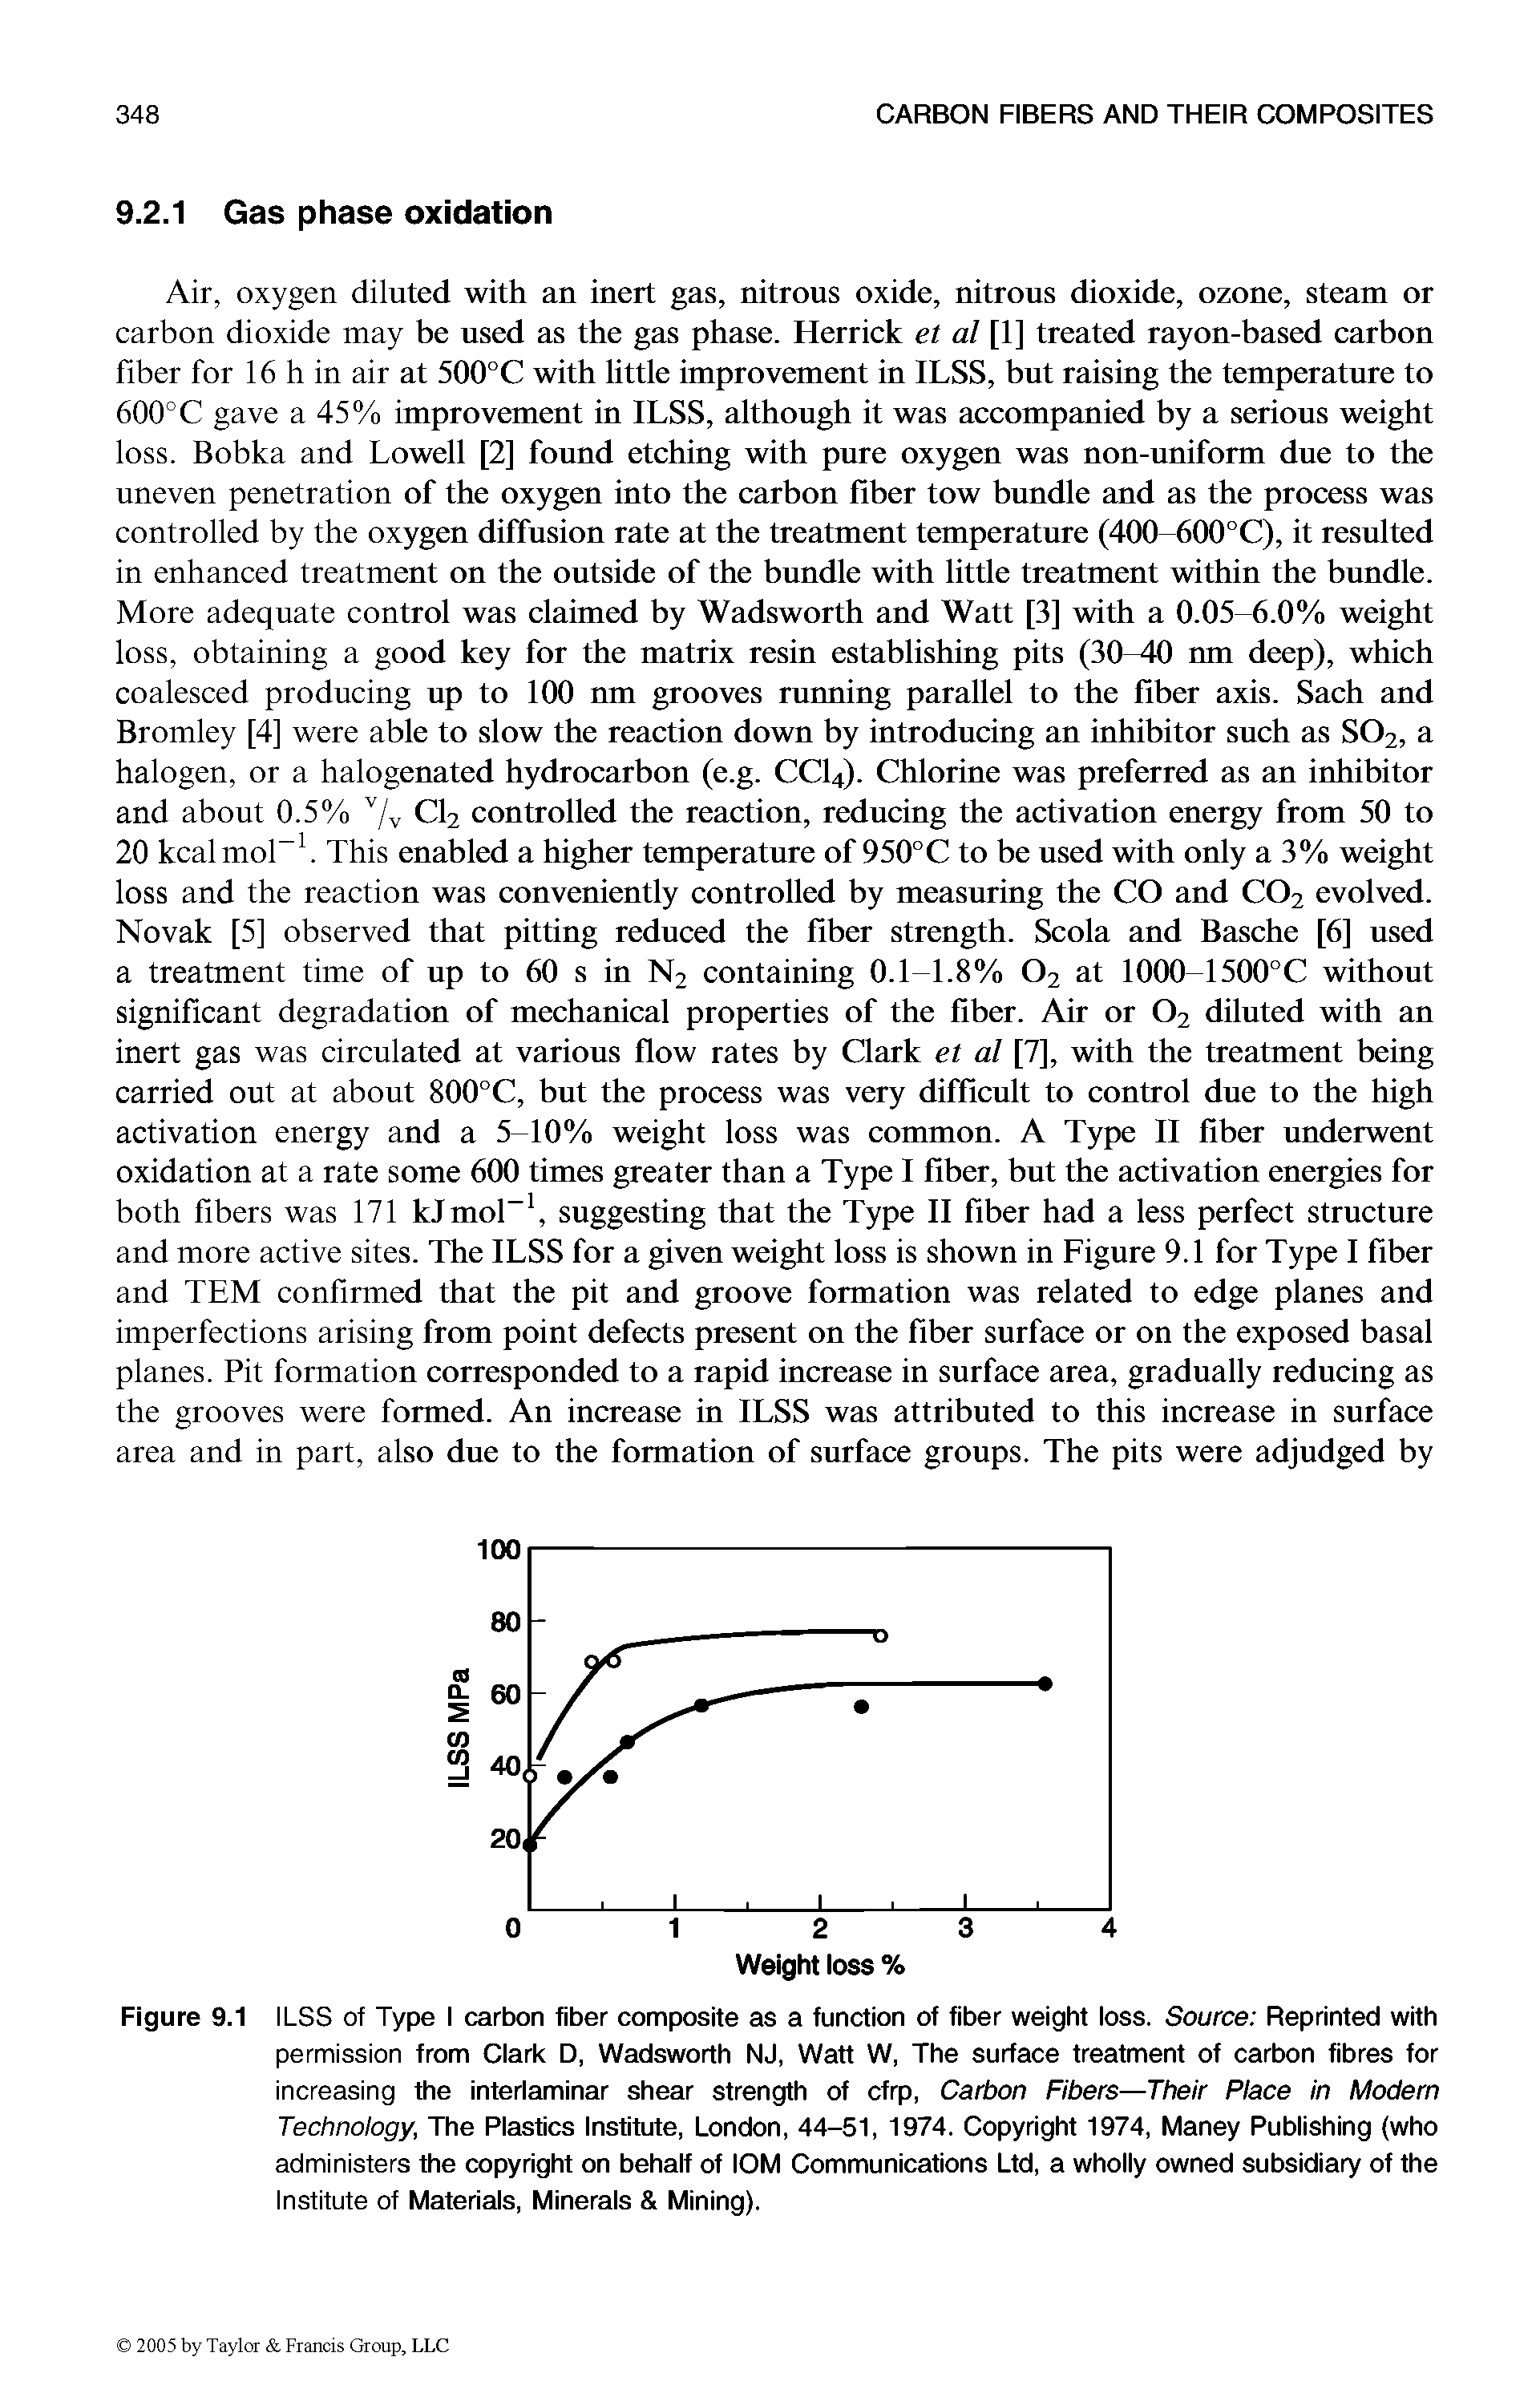 Figure 9.1 ILSS of Type I carbon fiber composite as a function of fiber weight loss. Source Reprinted with permission from Clark D, Wadsworth NJ, Watt W, The surface treatment of carbon fibres for increasing the interlaminar shear strength of cfrp, Carbon Fibers—Their Place in Modem Technology, The Plastics Institute, London, 44-51, 1974. Copyright 1974, Maney Publishing (who administers the copyright on behalf of lOM Communications Ltd, a wholly owned subsidiary of the Institute of Materials, Minerals Mining).